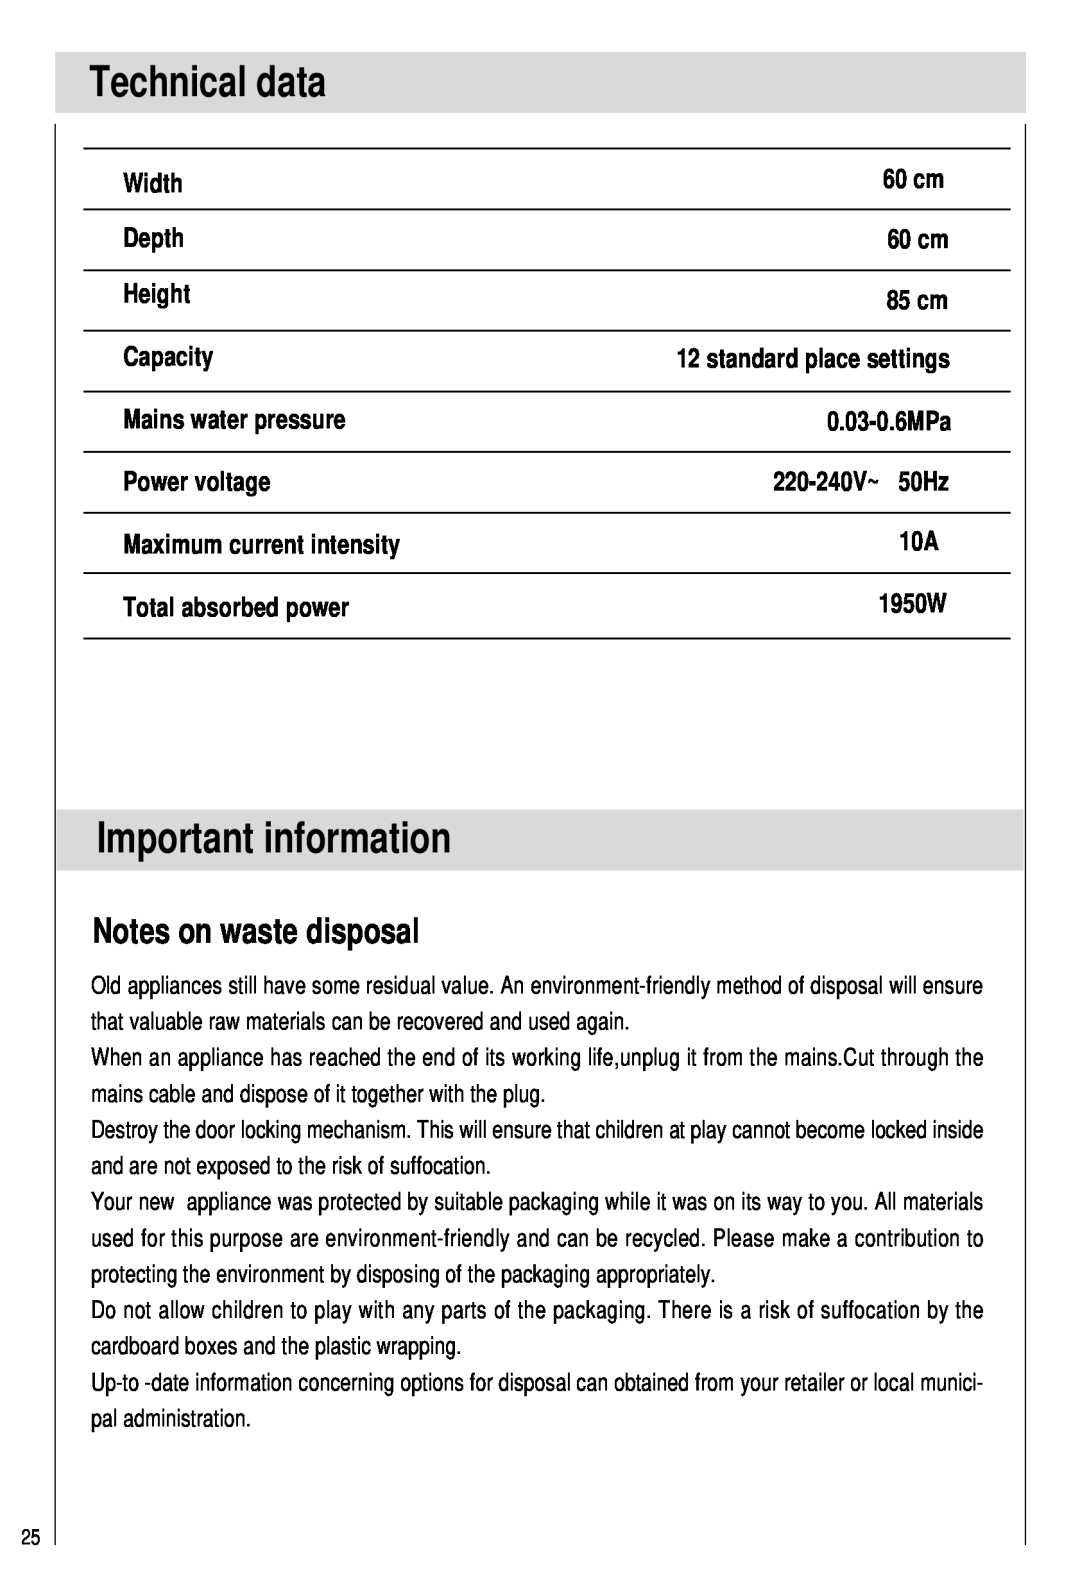 Haier DW12-PFE2-U manual Technical data, Important information, Notes on waste disposal, Width, 60 cm, Depth, Height, 85 cm 